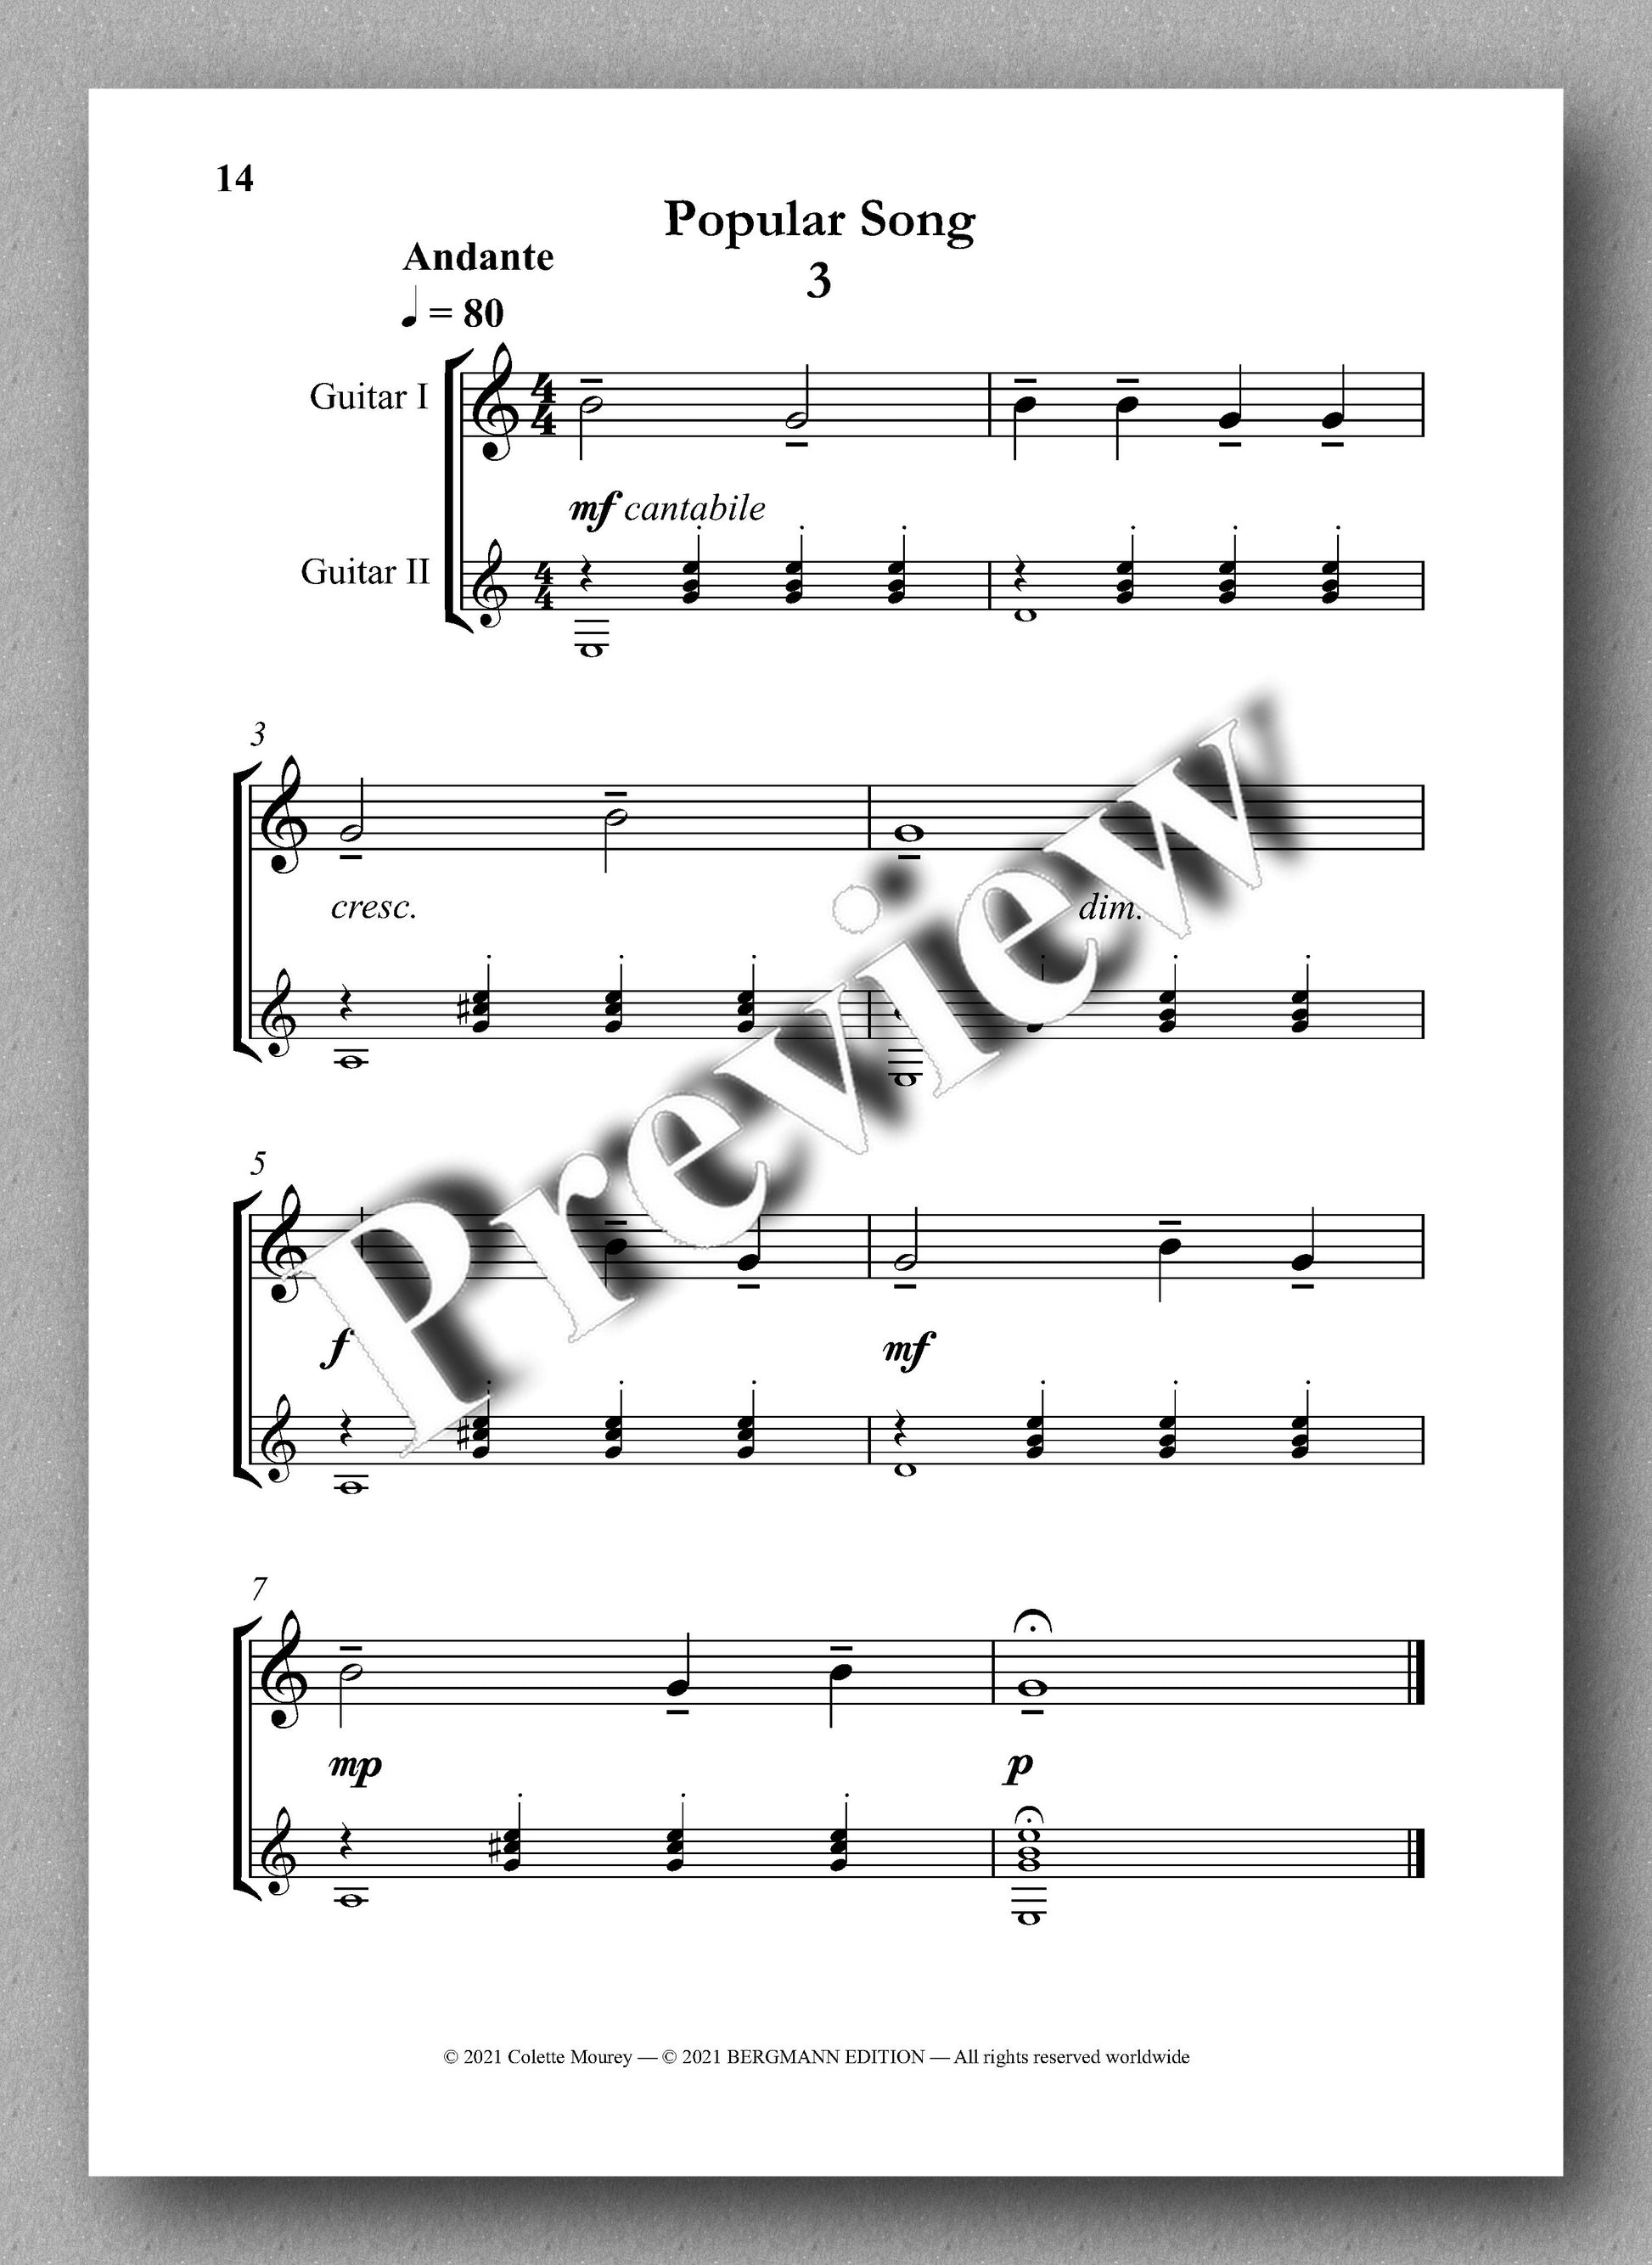 Mourey, Step by Step - music score 1